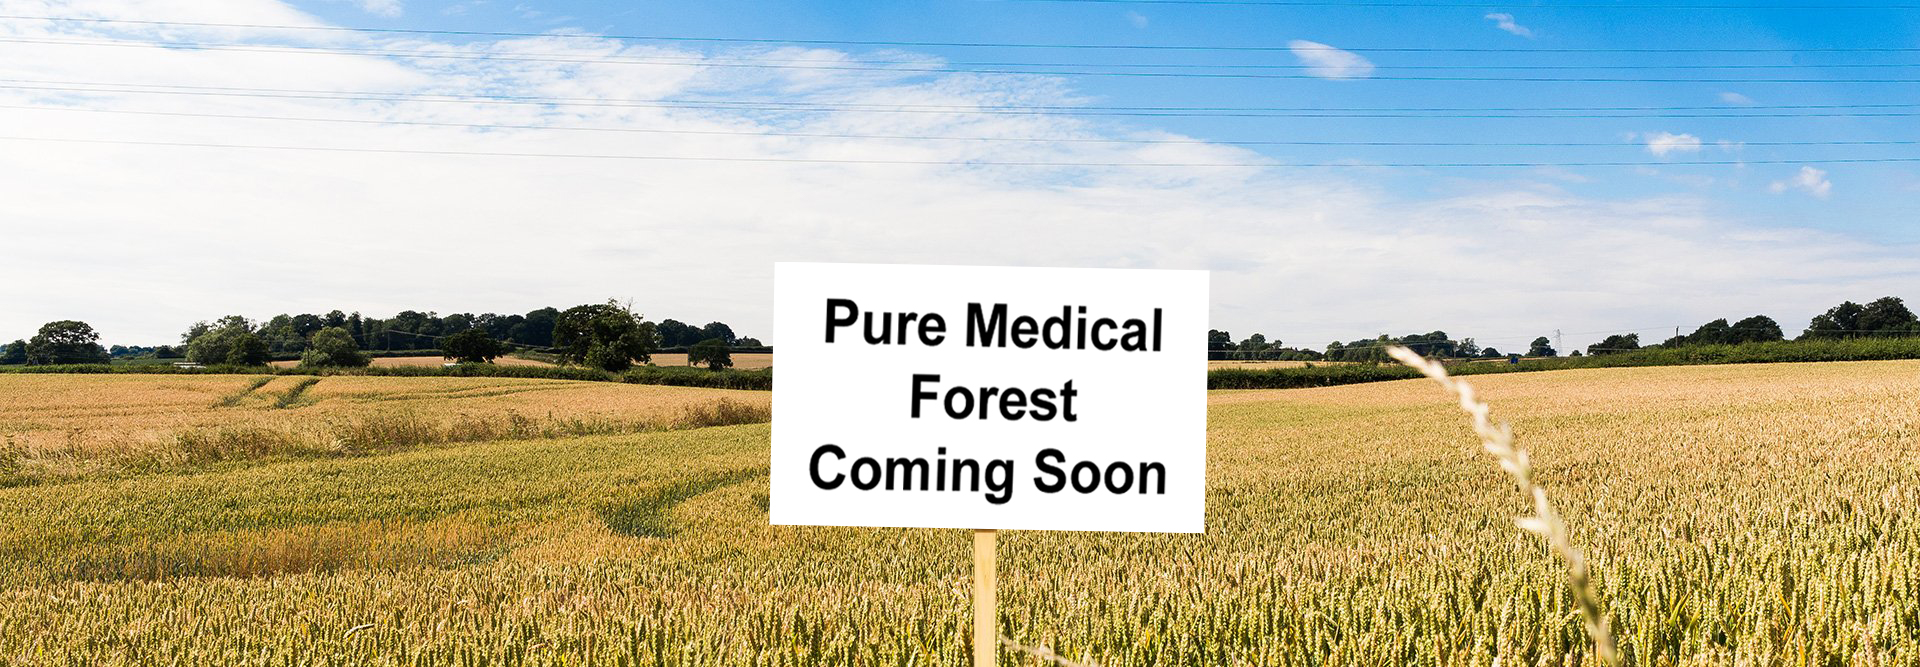 Pure Medical Forest